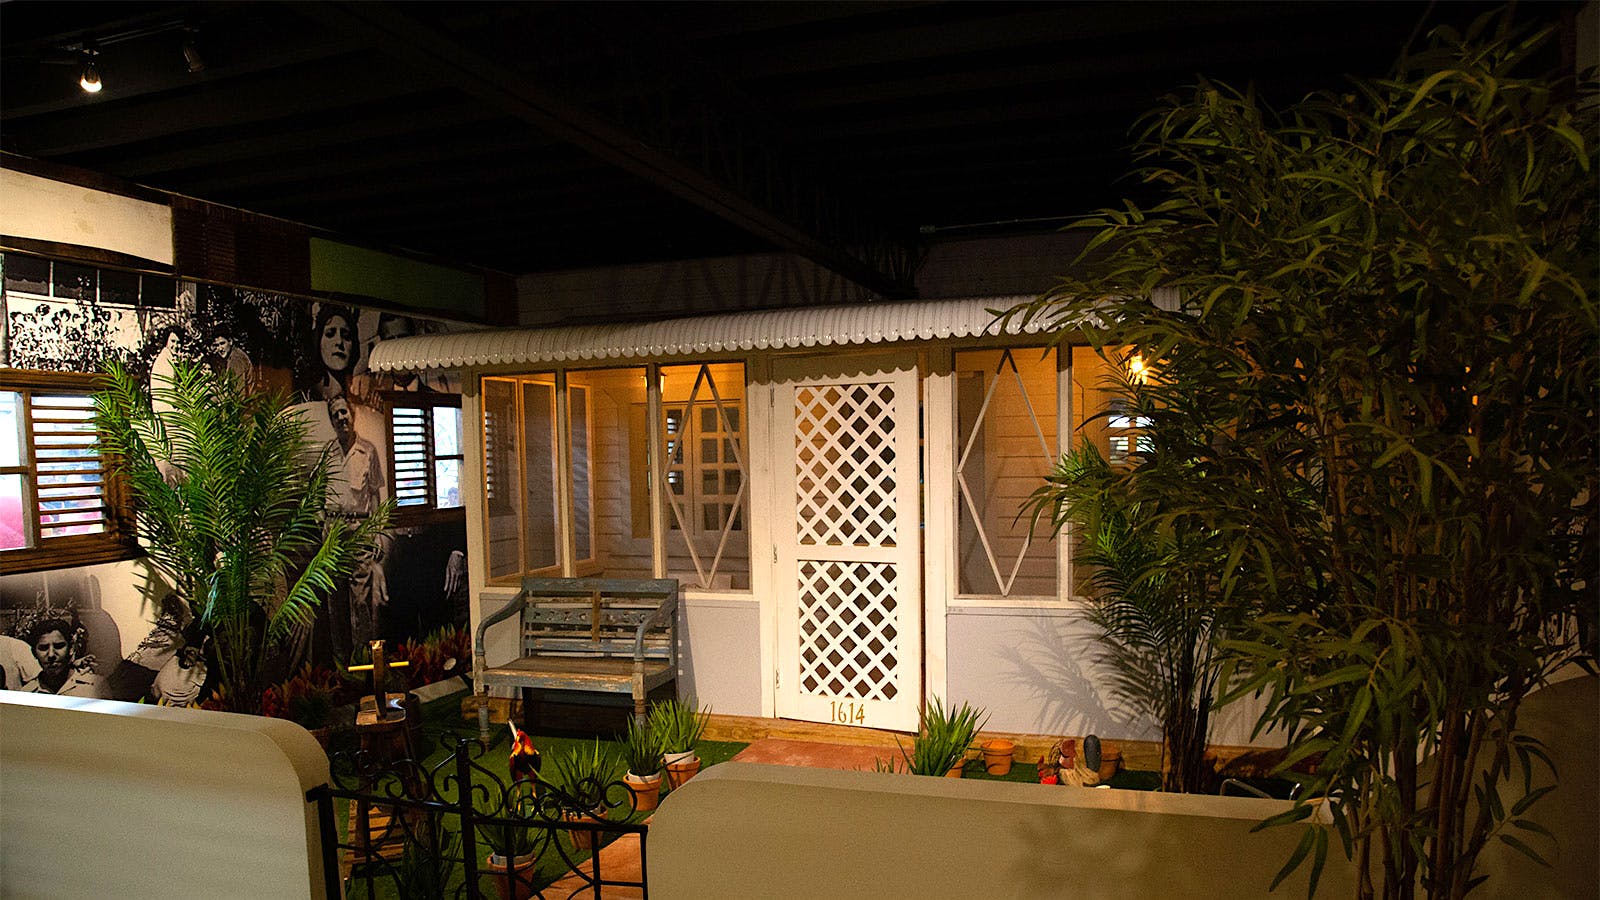 A replica of the tin-roof covered porch located in Ybor City, Tampa, that Arturo Fuente built to raise his family. In the very early days of the Fuente brand, that’s where the cigars were rolled. They’ve come a long way.